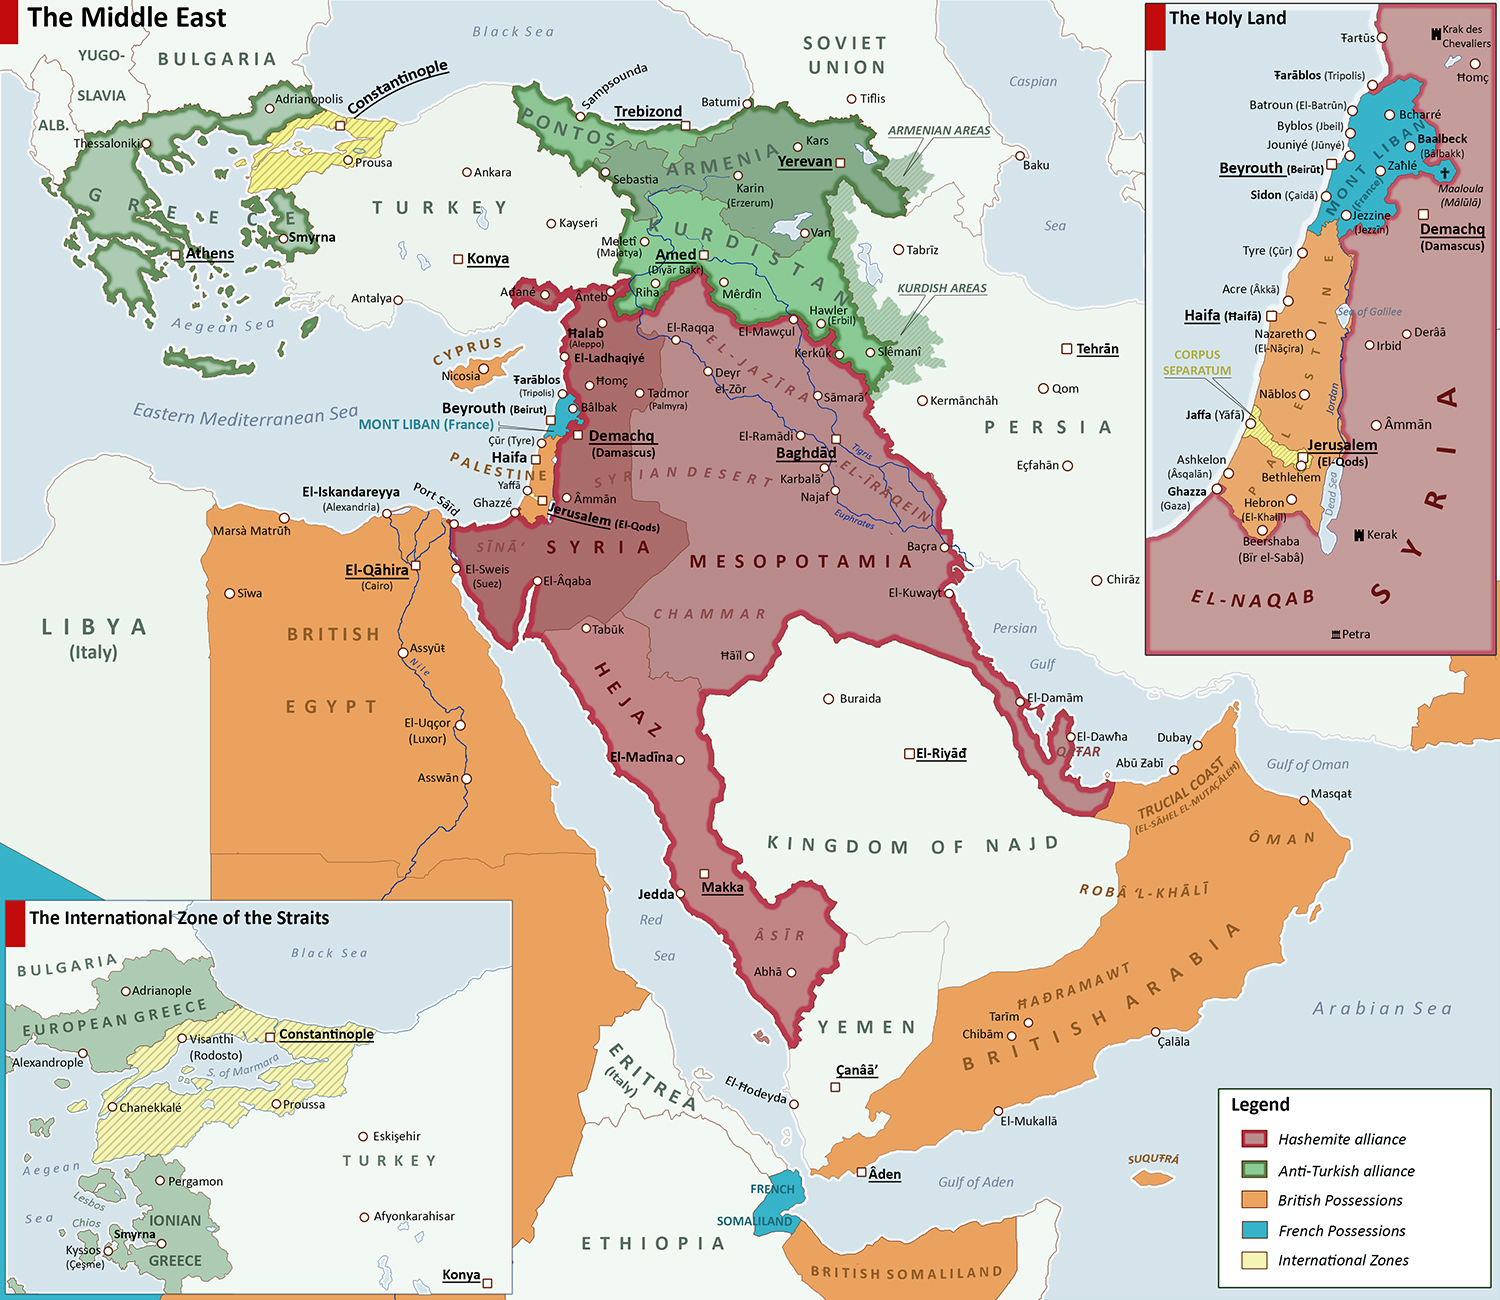 Map Of A Possible Middle East In 2050 2100 Imaginarym - vrogue.co